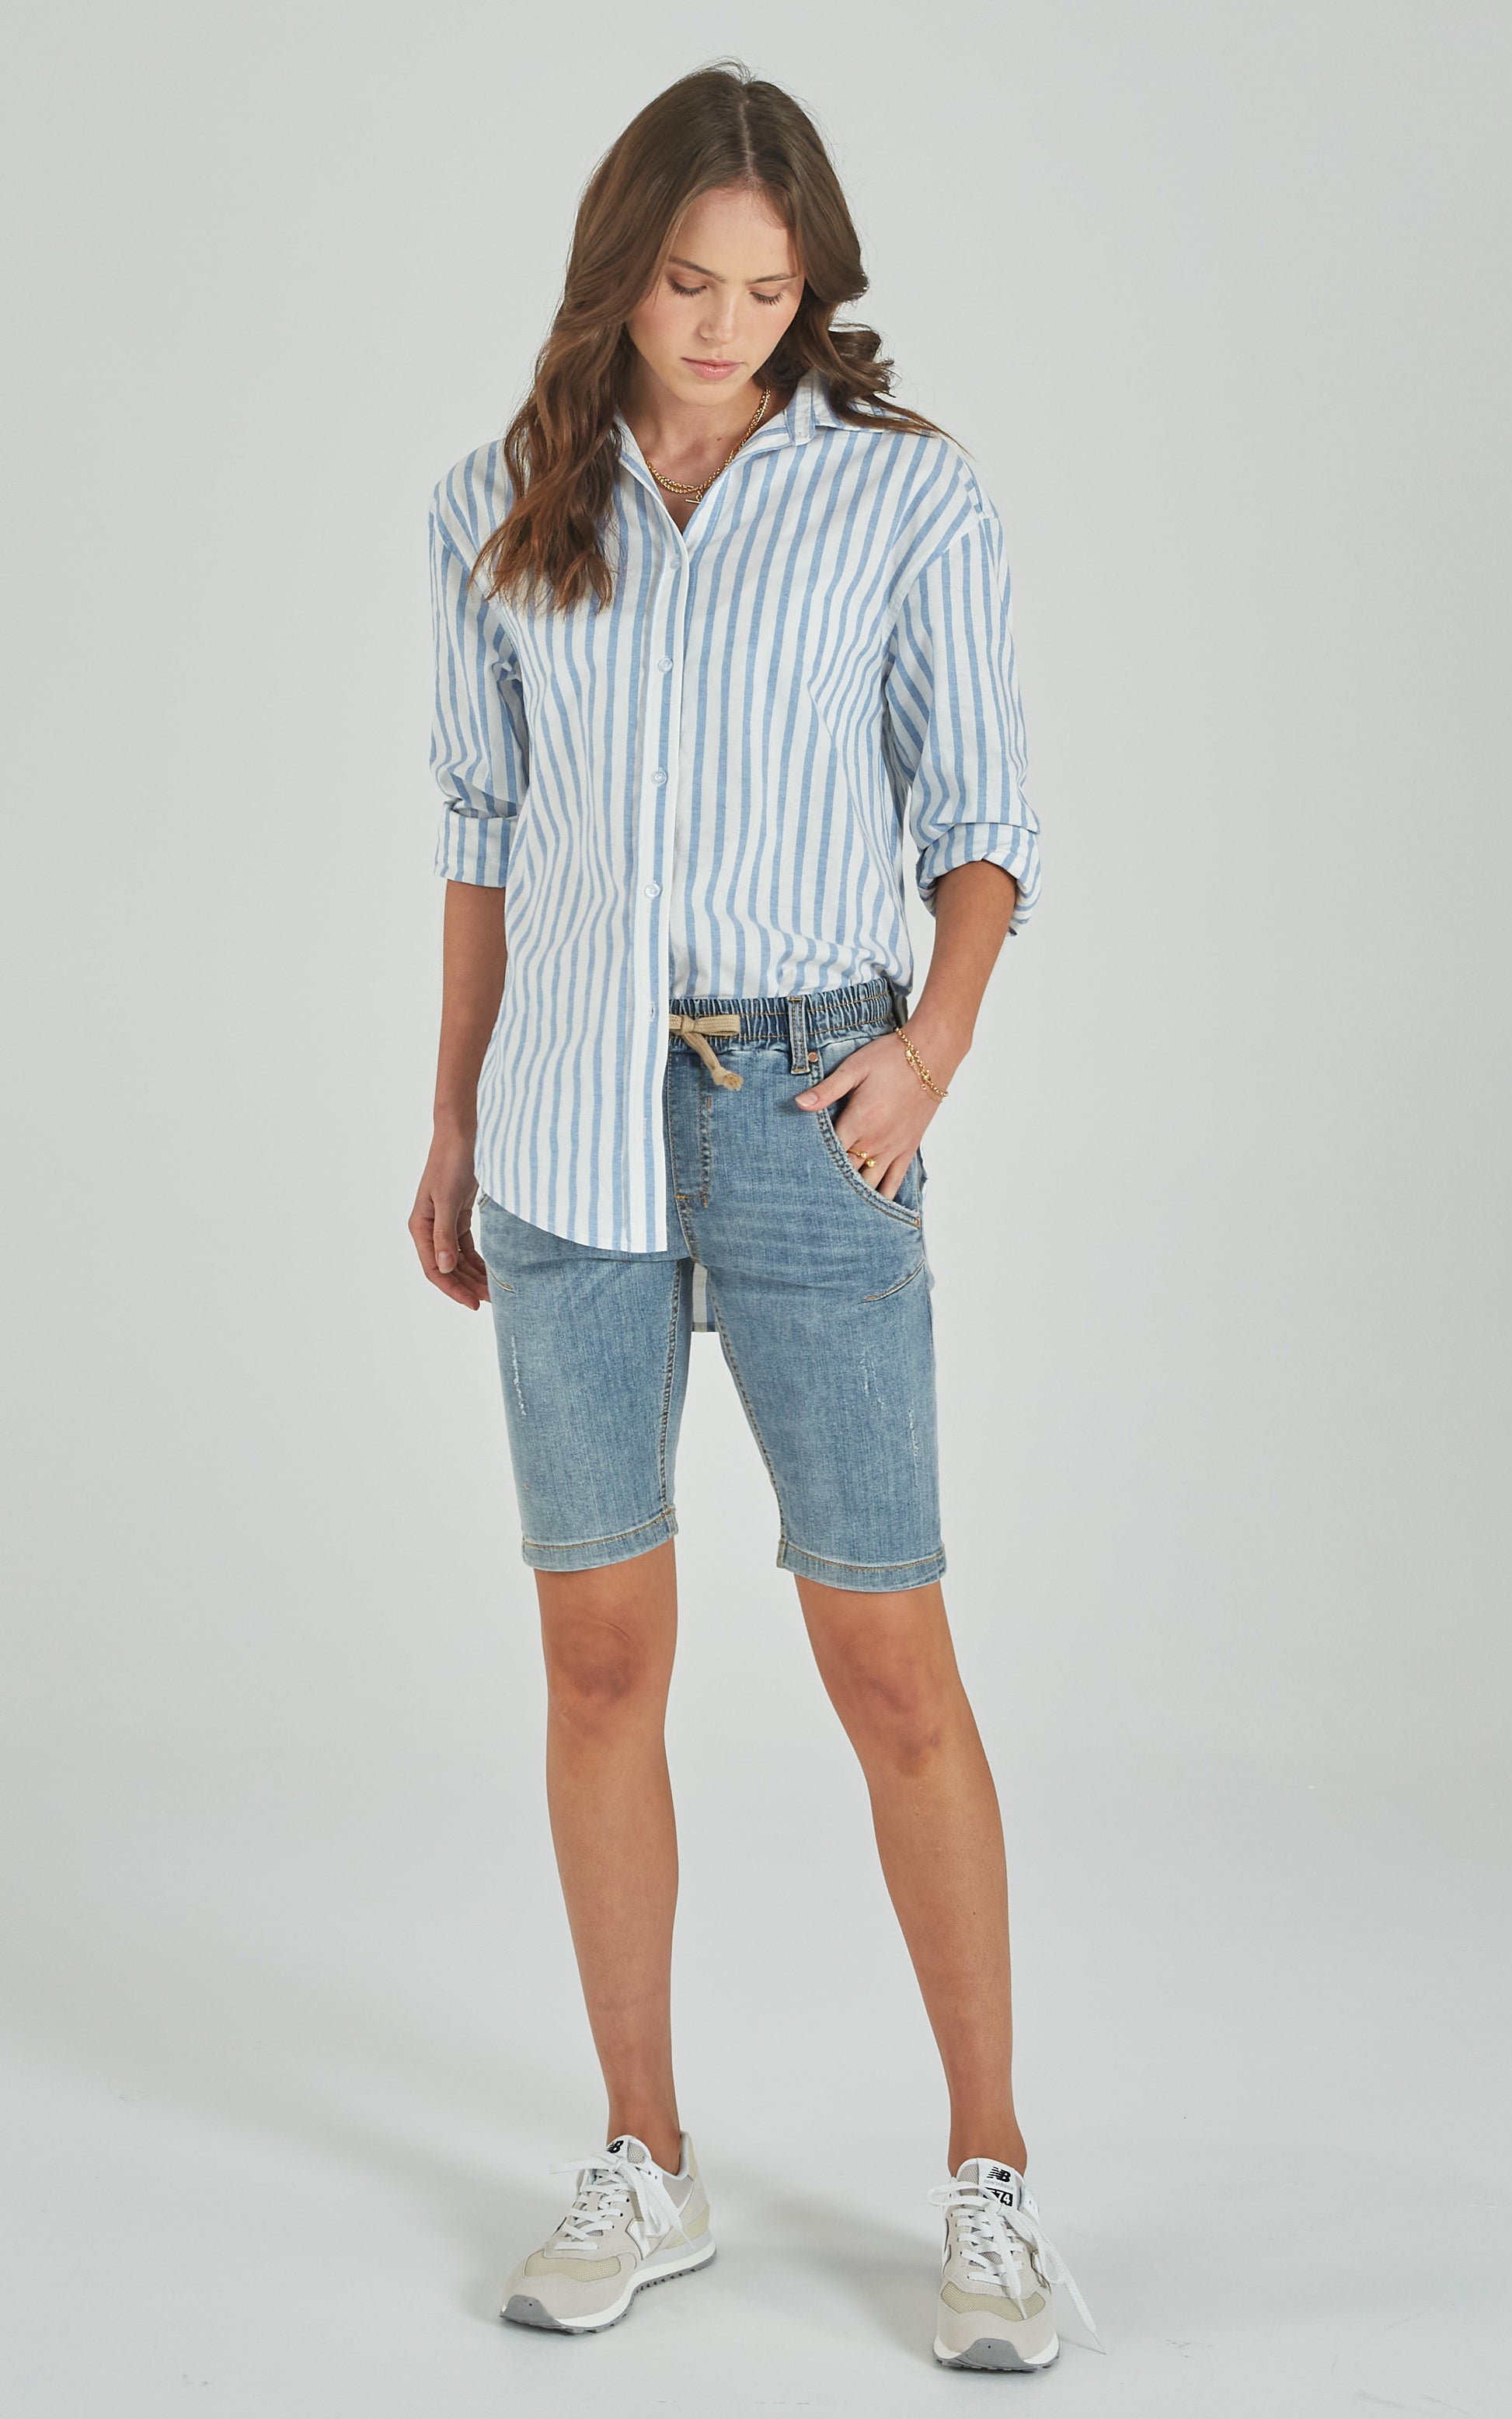 vertex Give Disgust long denim shorts womens To tell the truth valley  verdict